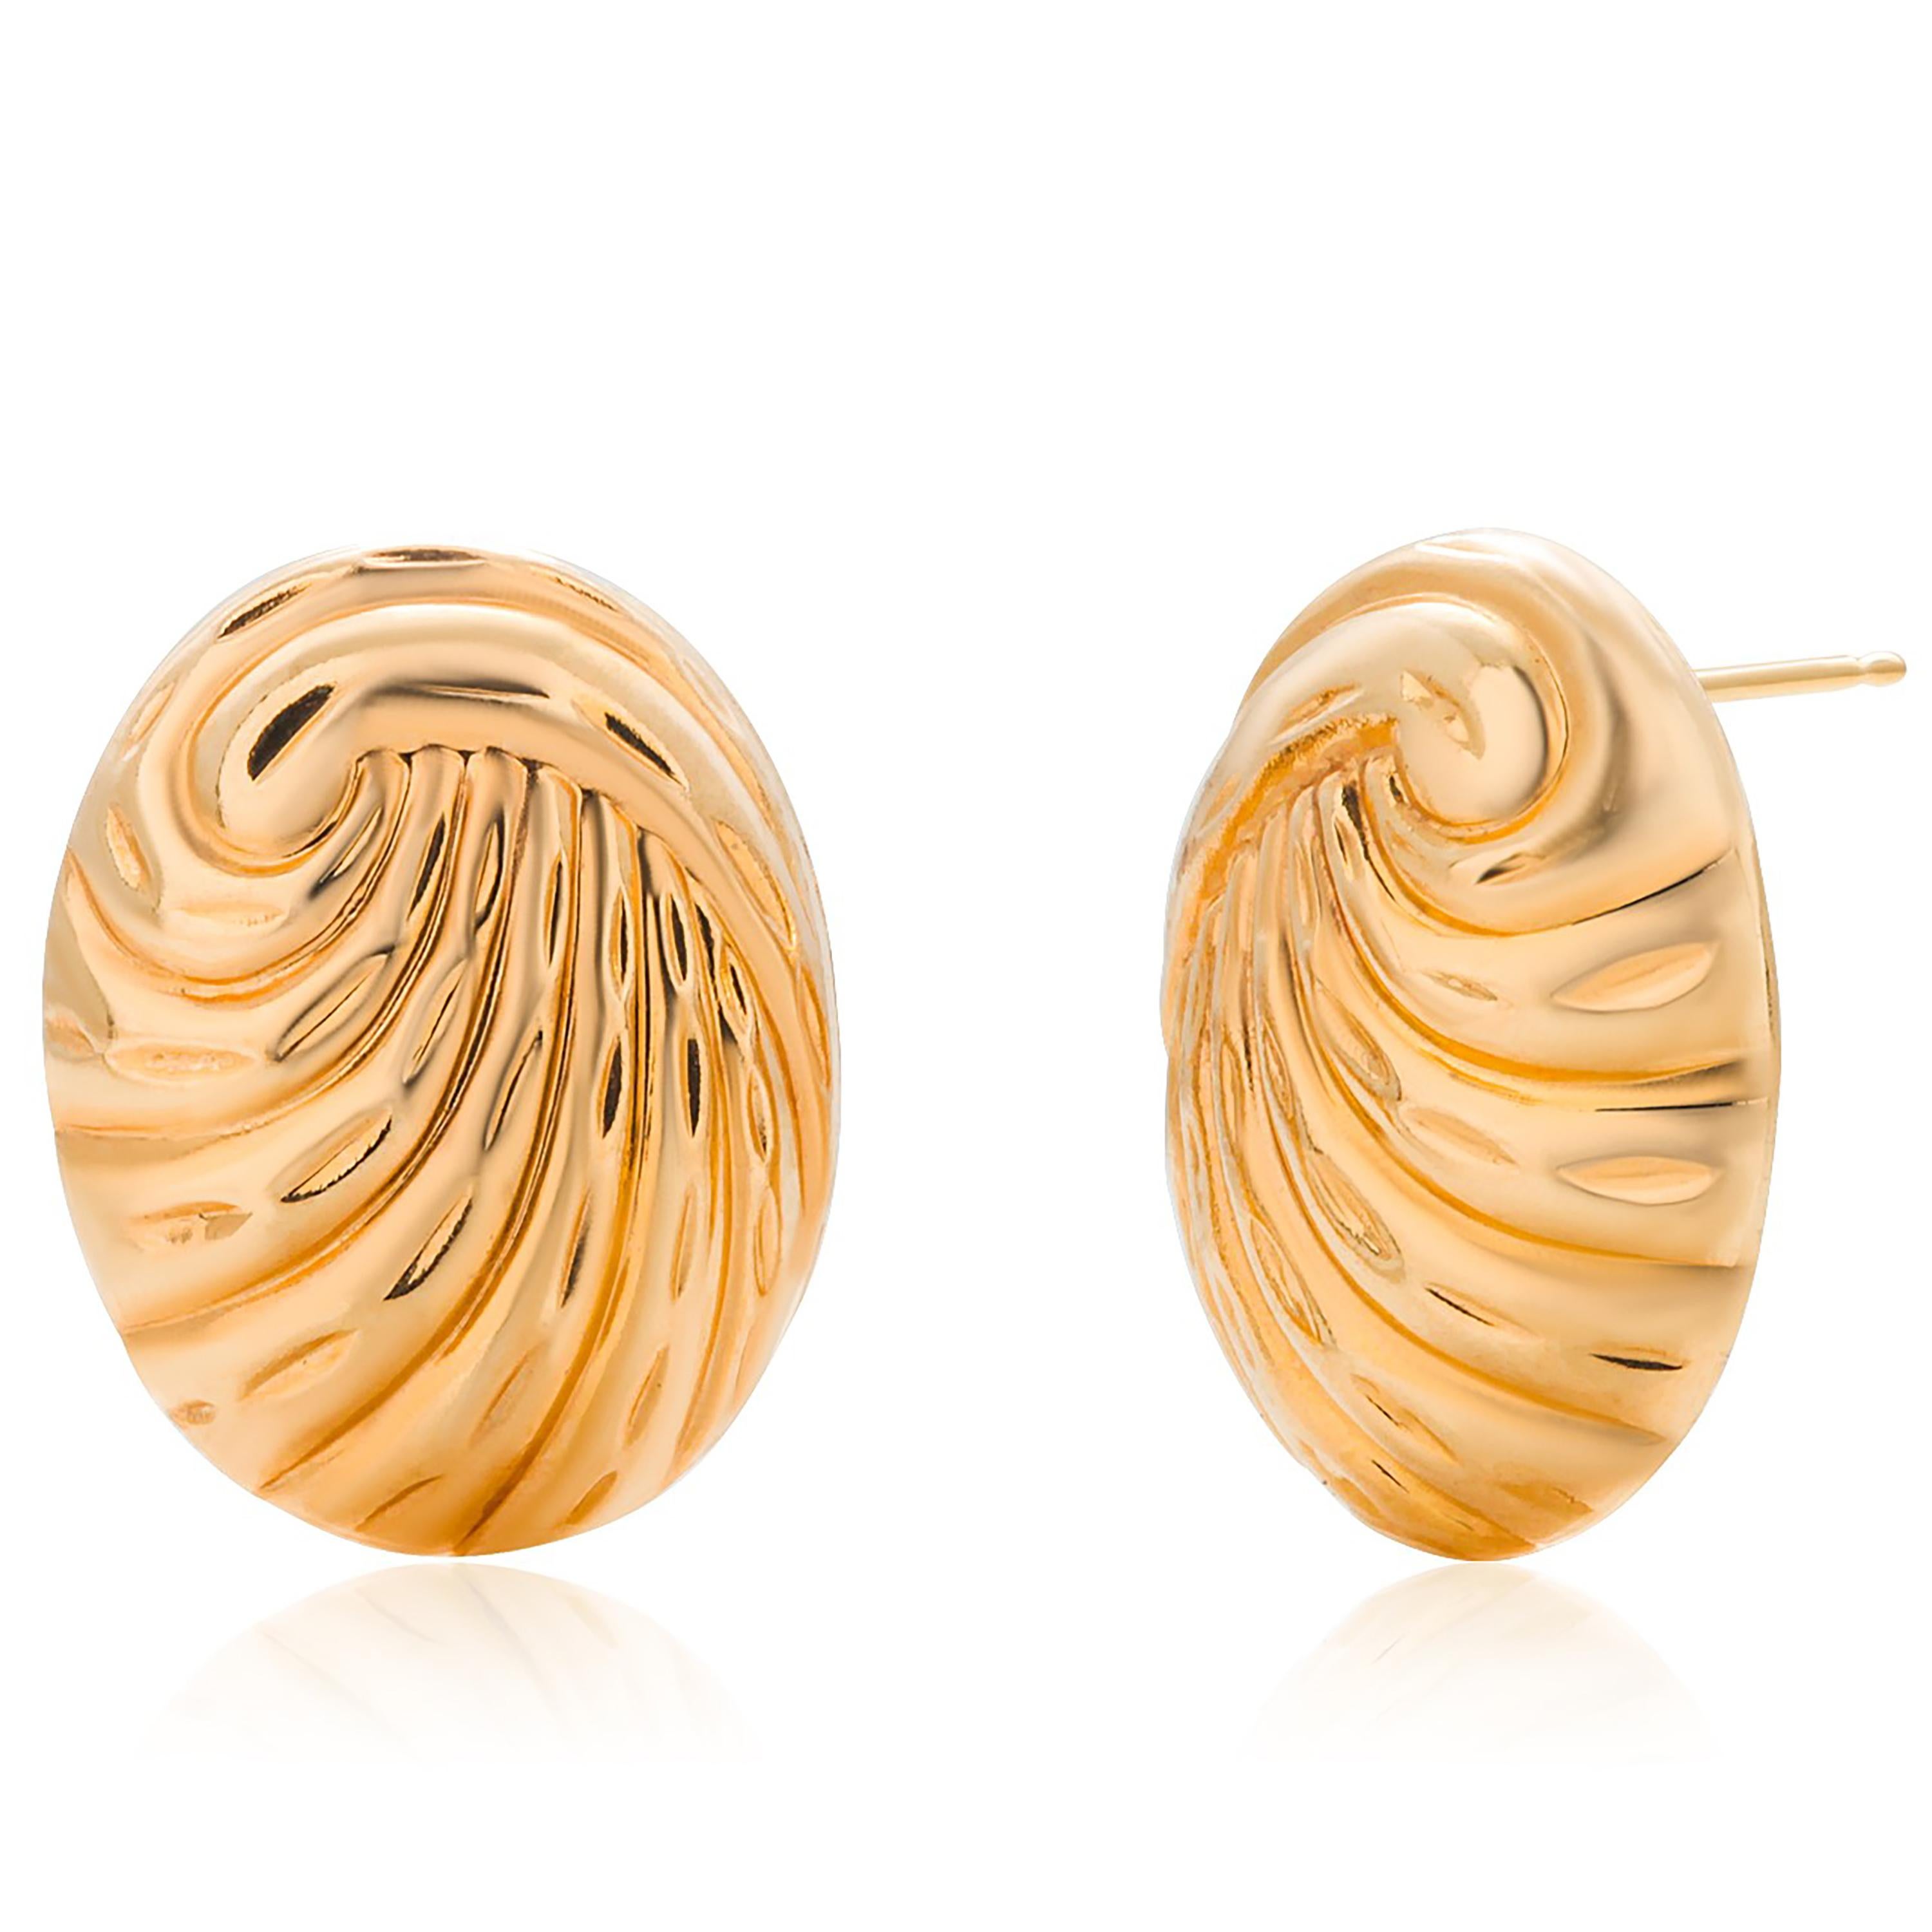 Vintage Ridged Very Thin Foil 14 Karat Yellow Gold  0.60 Inch Long Earrings In Good Condition For Sale In New York, NY